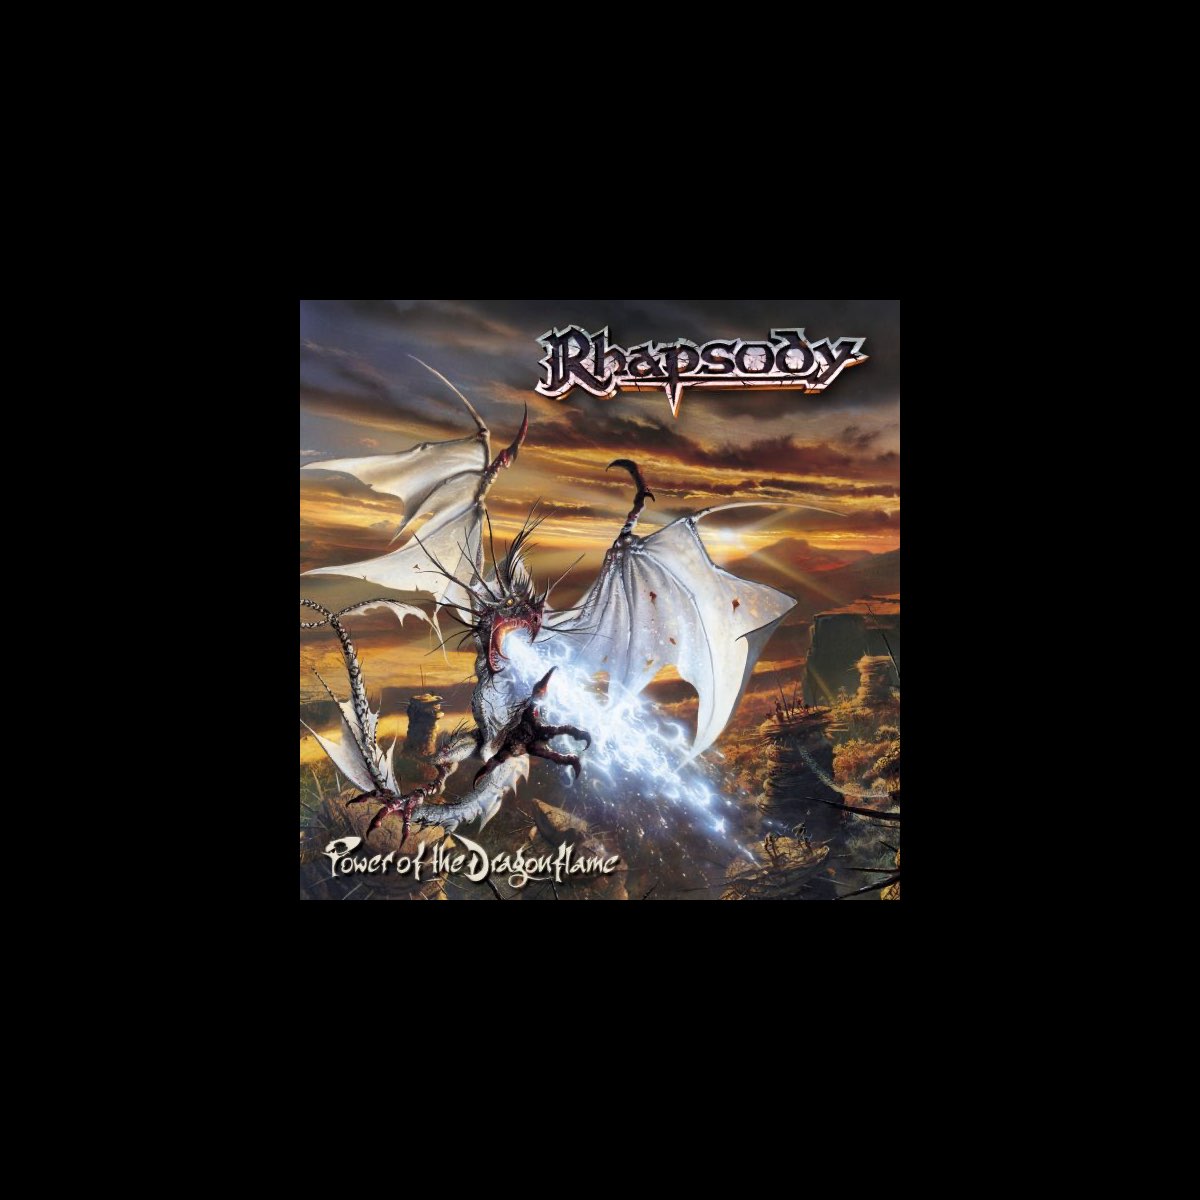 Power of the Dragonflame by Rhapsody on Apple Music